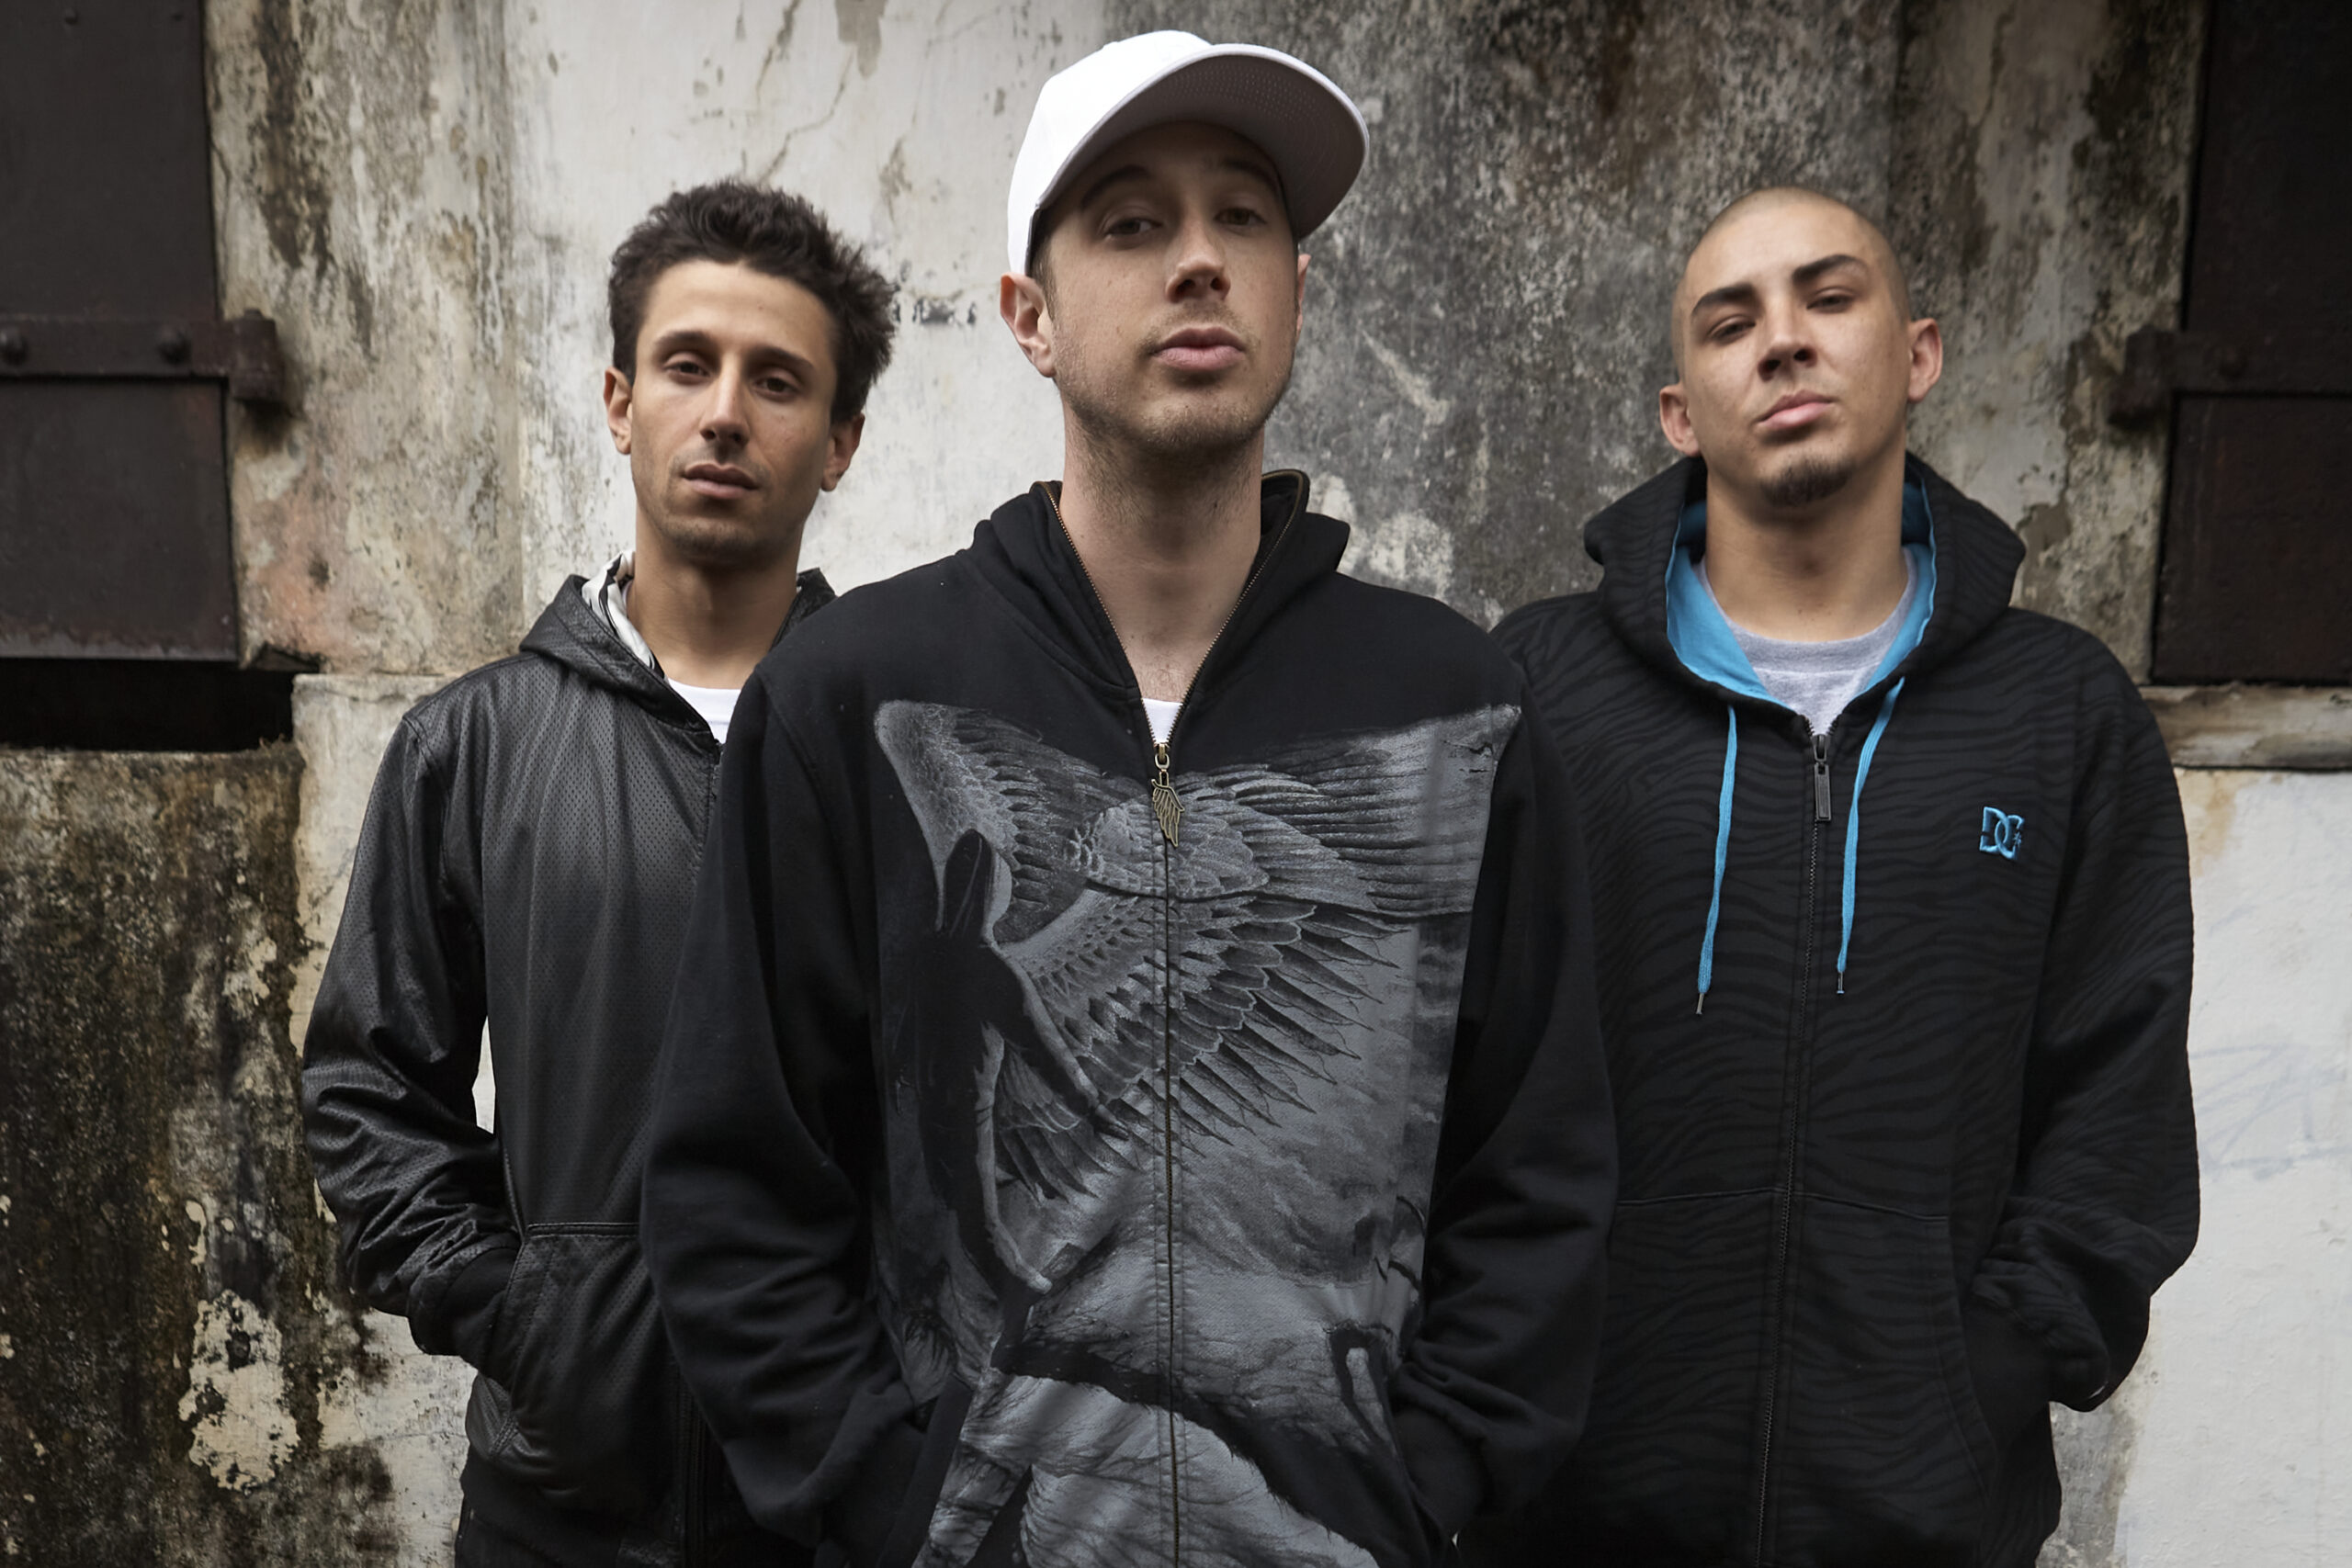 bliss n eso flying colours tour